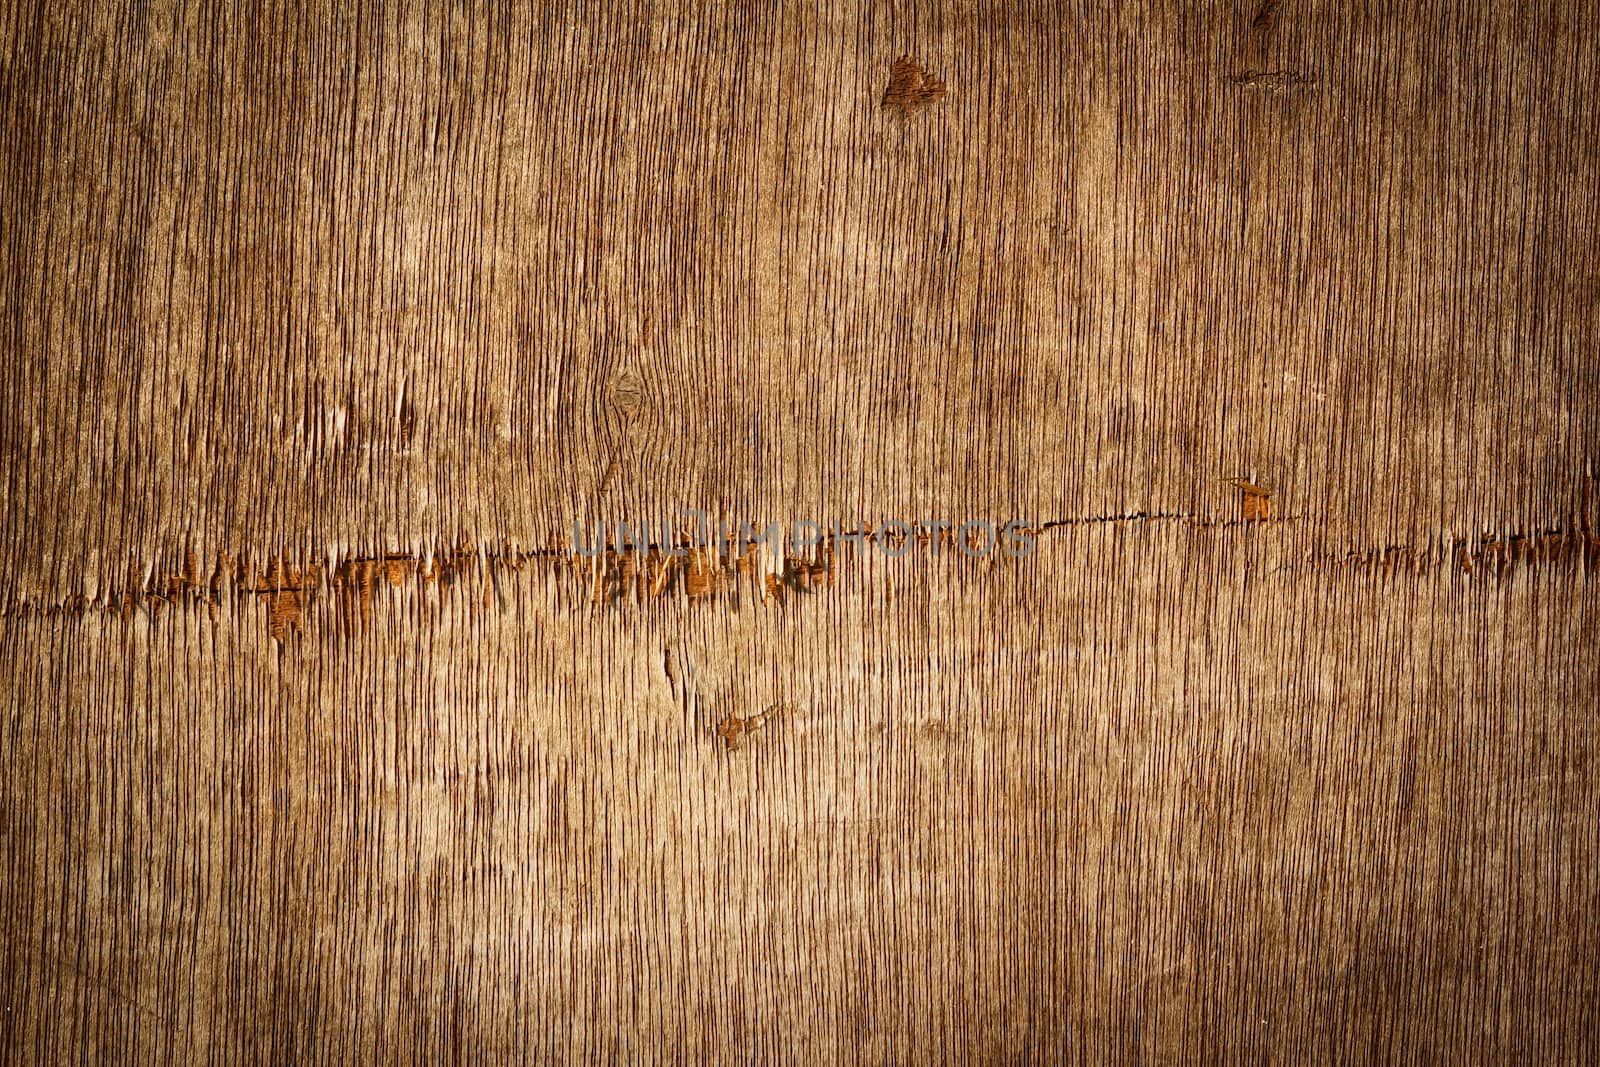 Old cracked wood board background